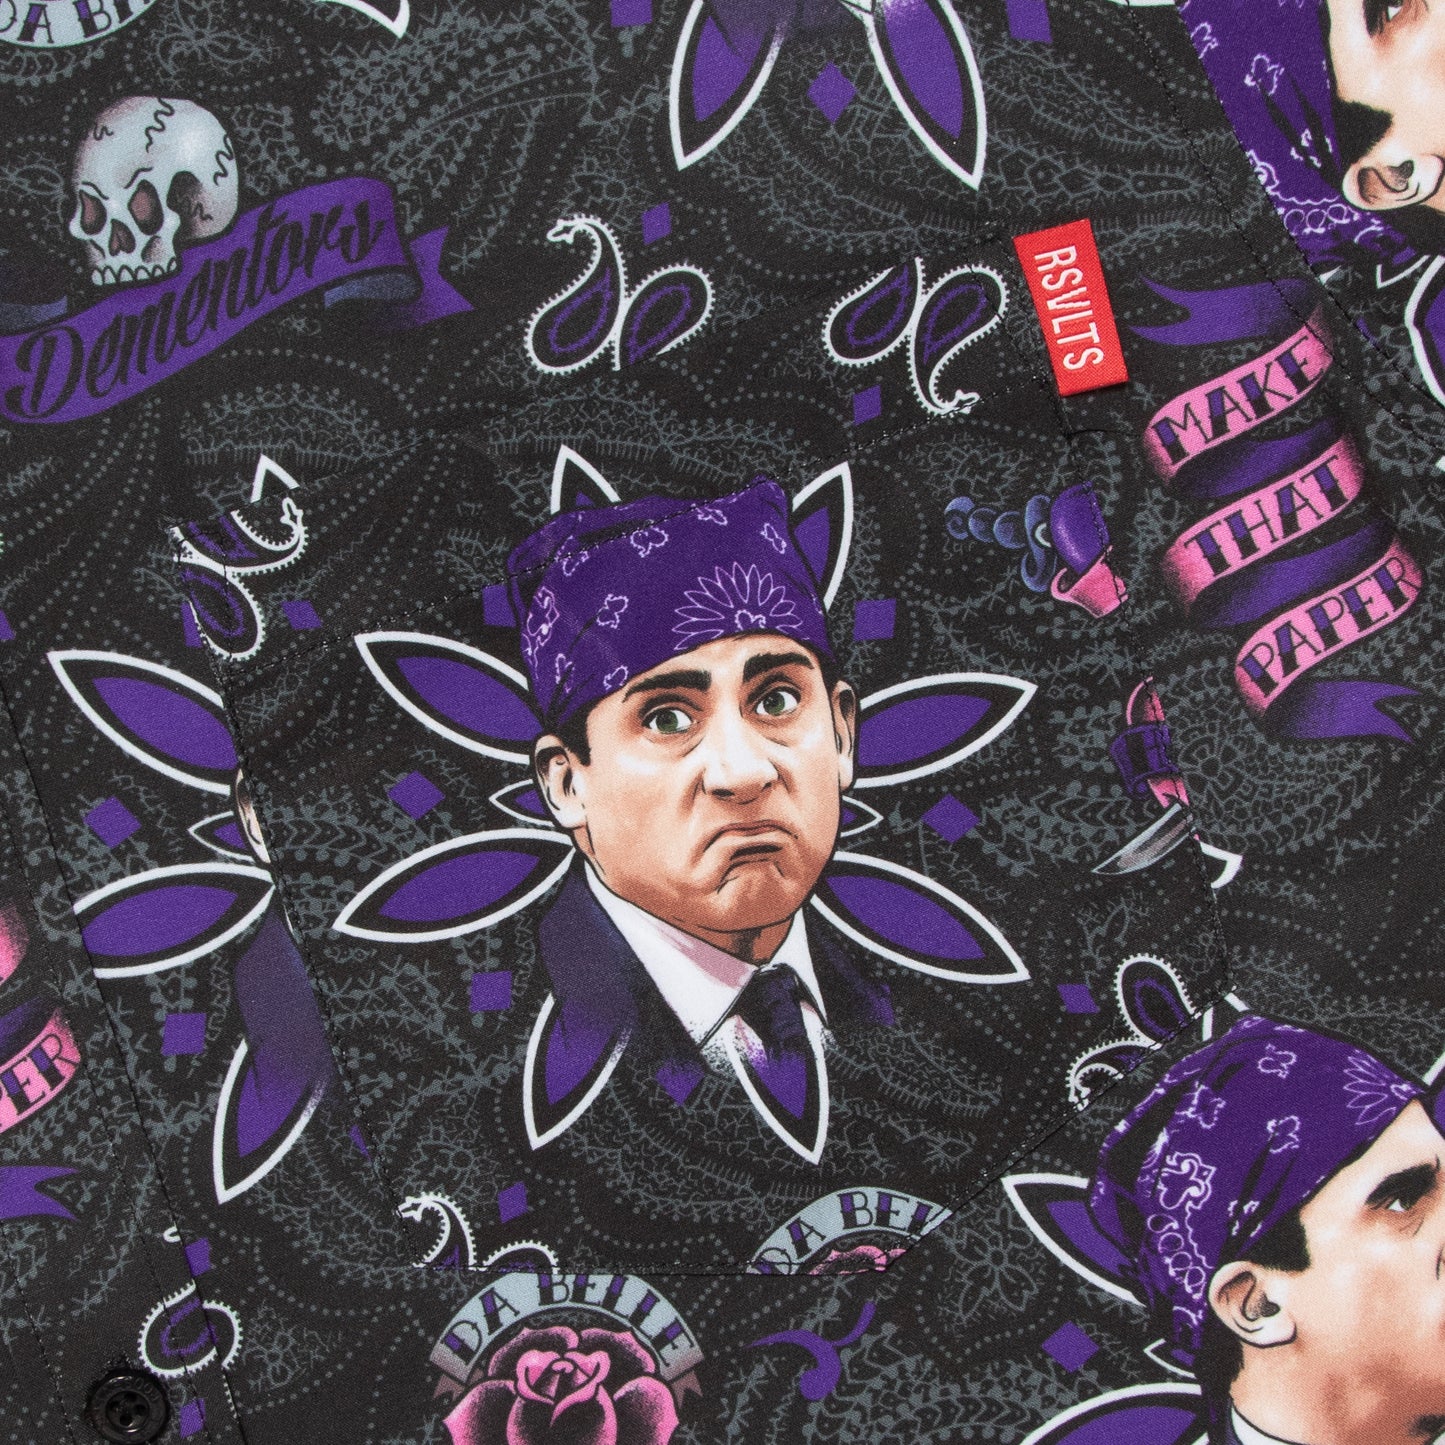 The Office "Prison Mike" Shirt